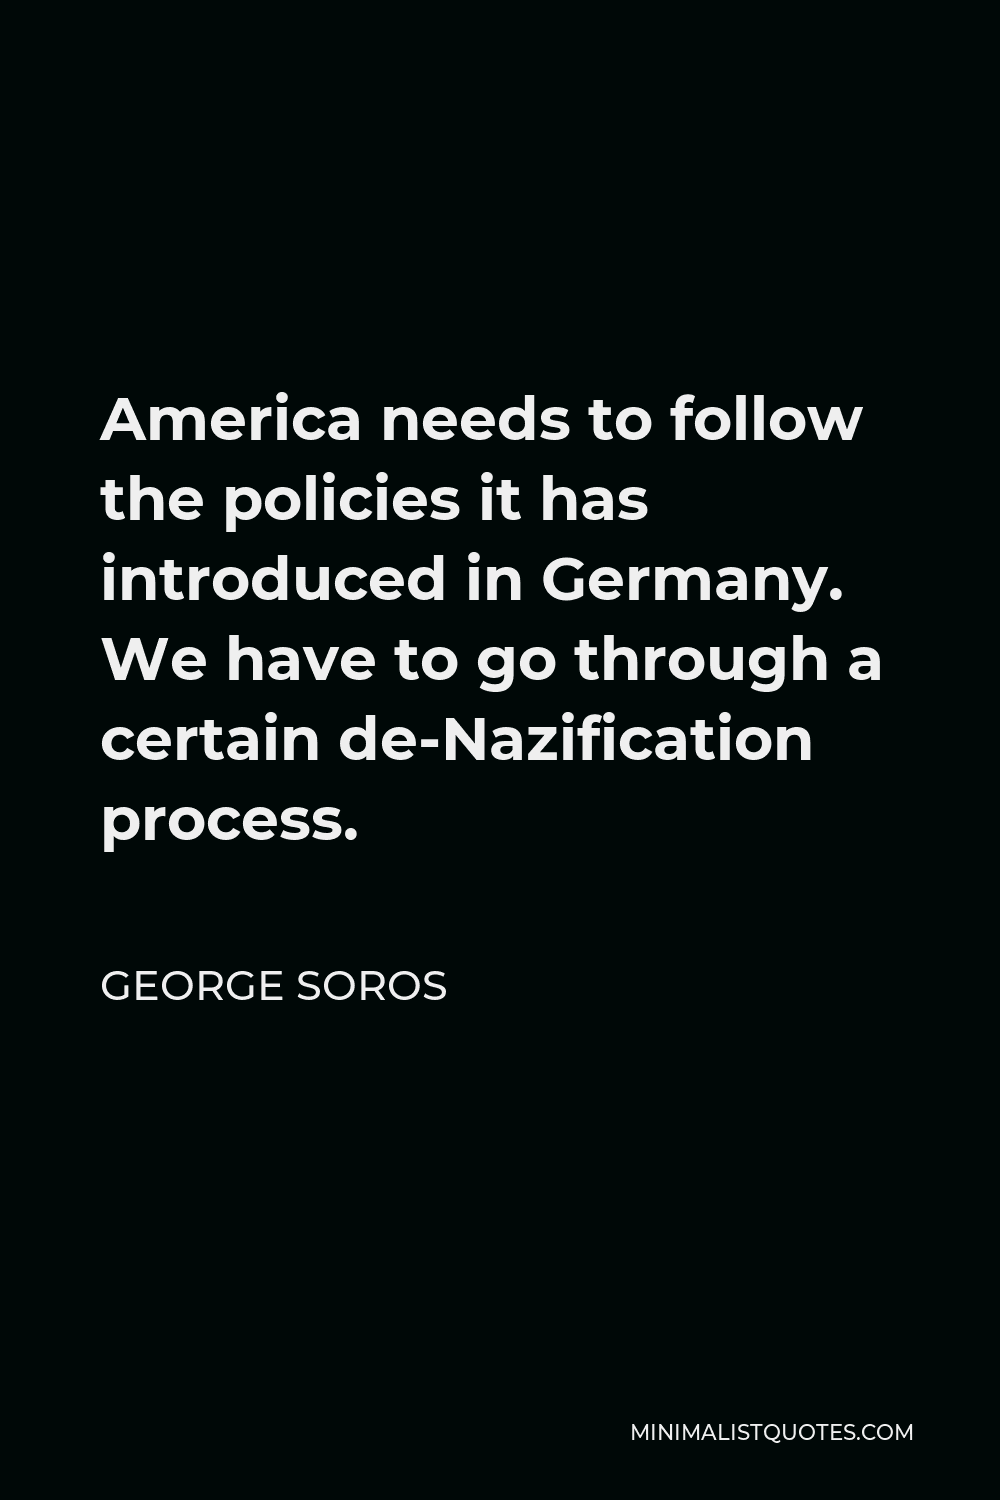 George Soros Quote - America needs to follow the policies it has introduced in Germany. We have to go through a certain de-Nazification process.